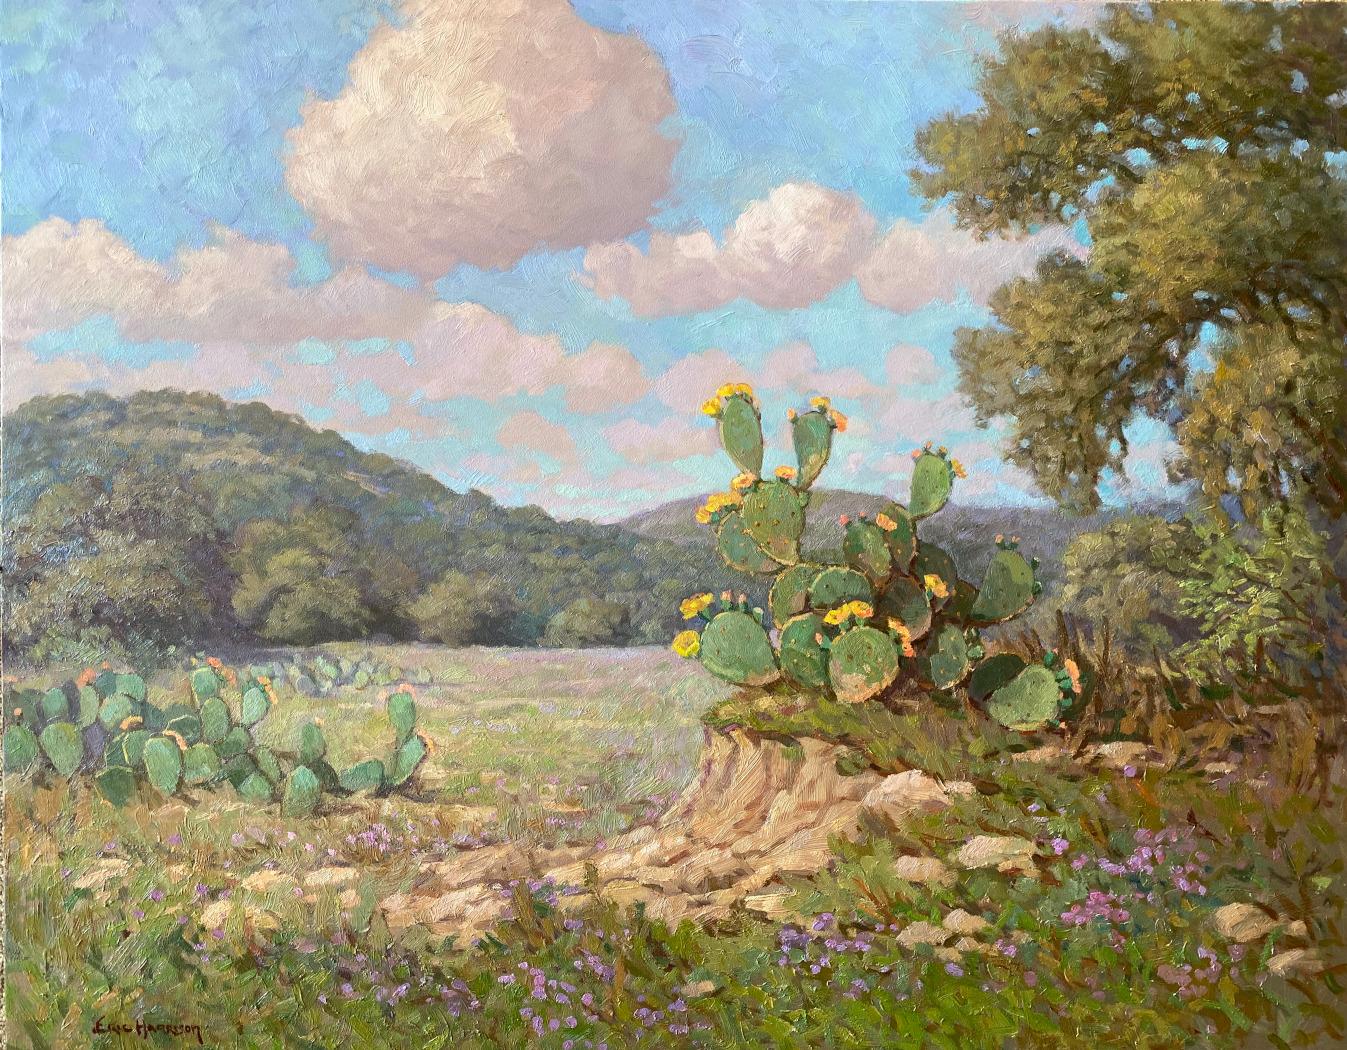 Landscape Painting Eric Harrison - ""CACTUS BLOOMS WITH VERBENA" PRICKLY PEAR TEXAS HILL COUNTRY